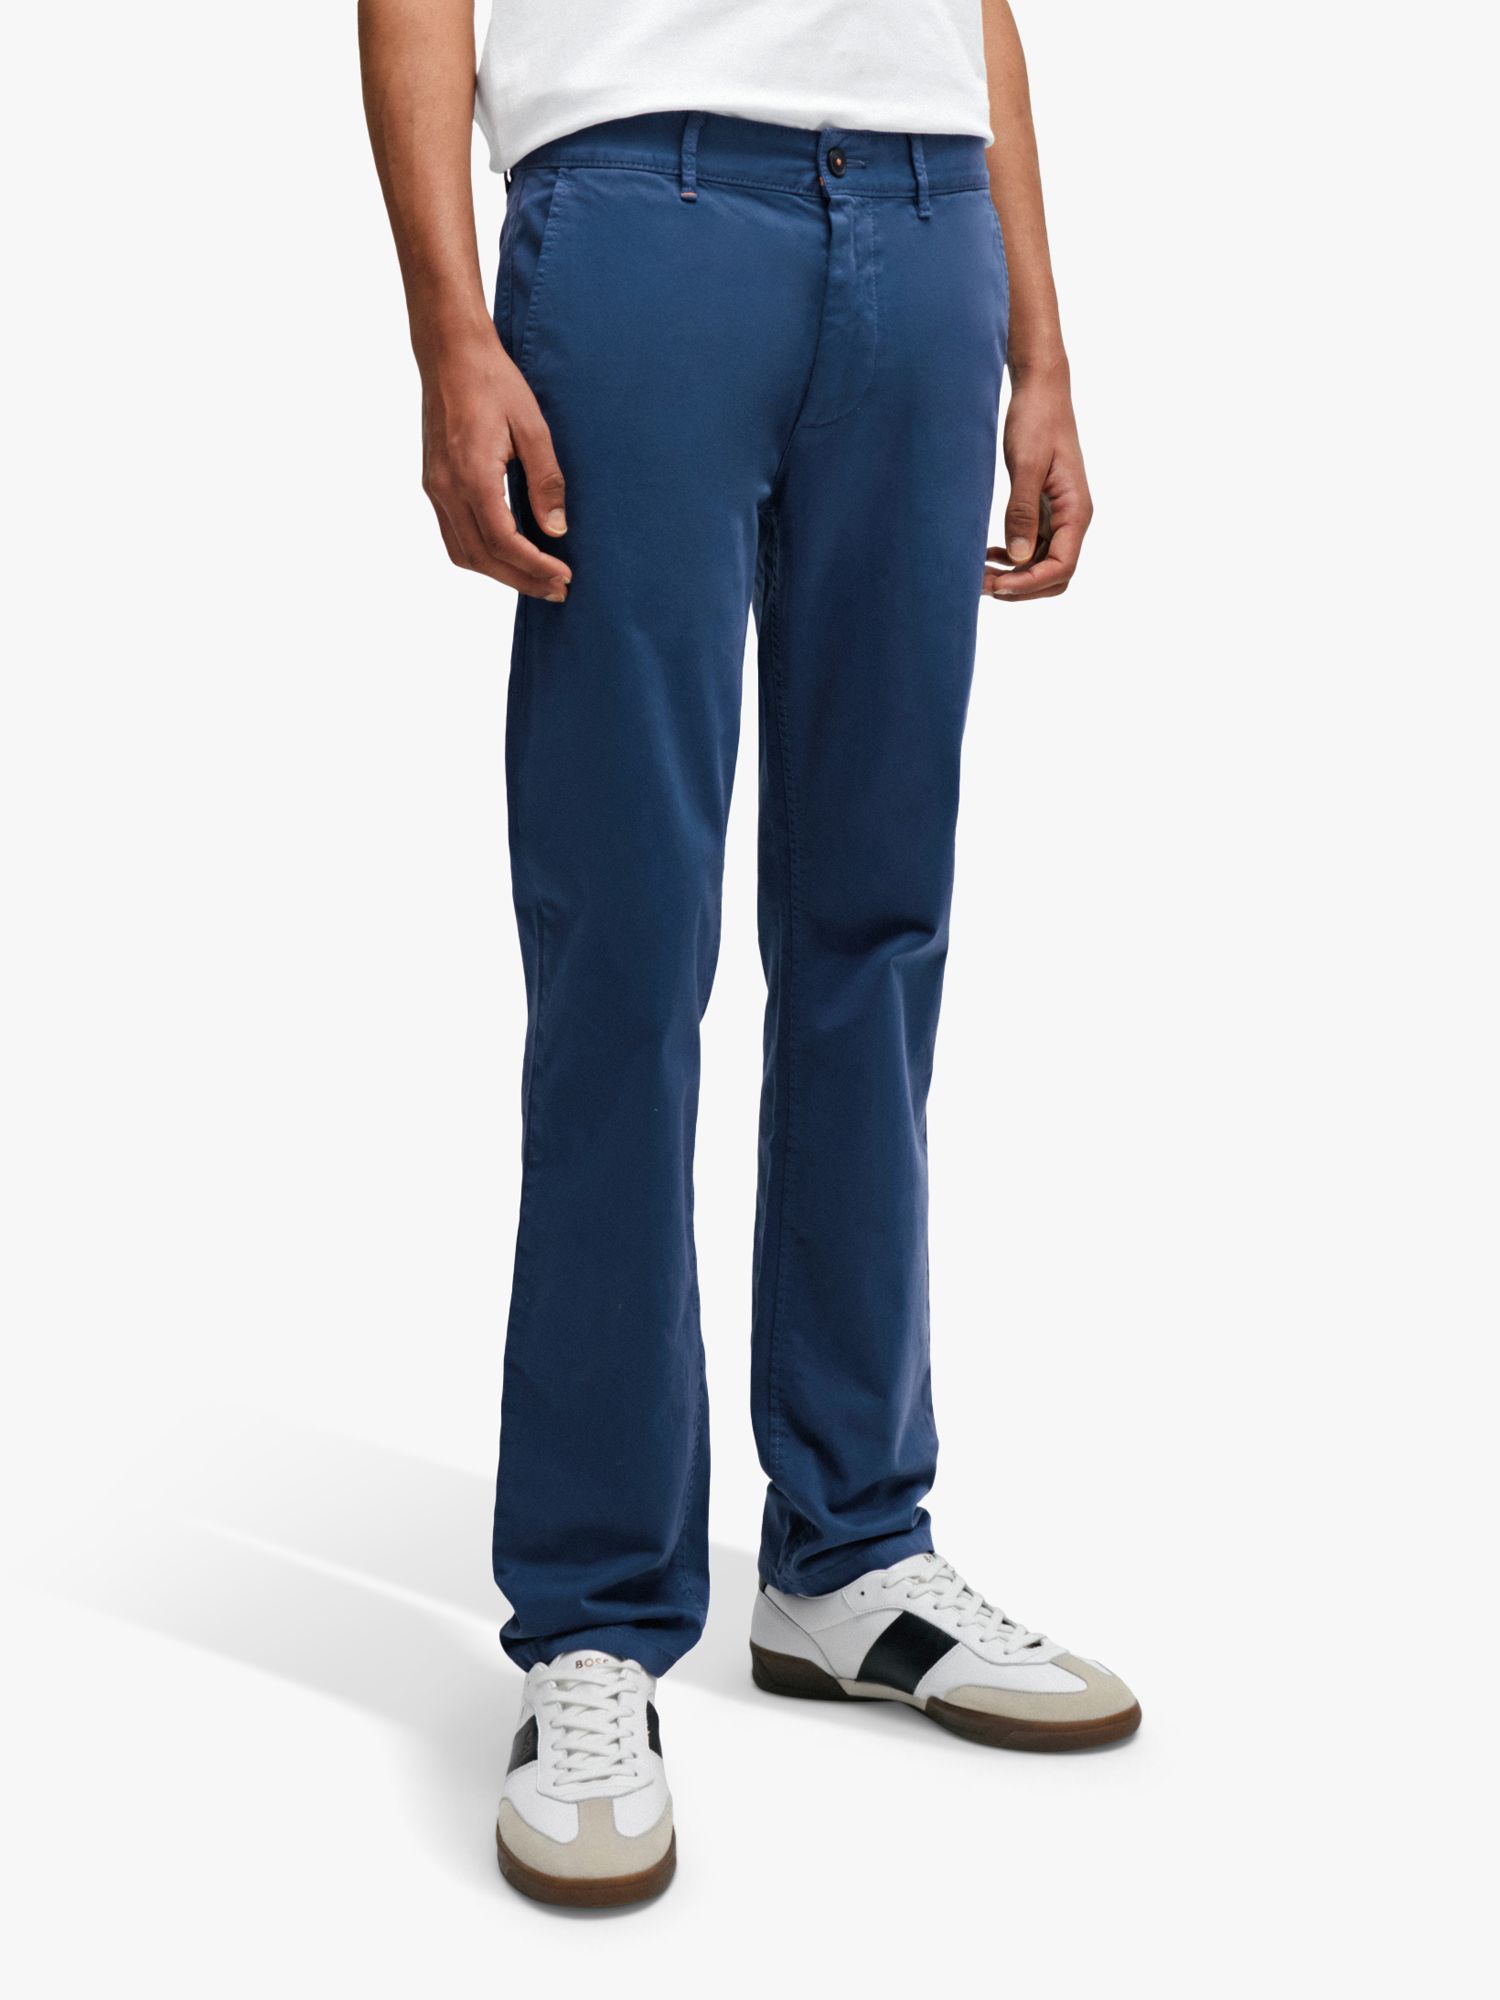 BOSS Slim Fit Comfort Stretch Chinos, Navy at John Lewis & Partners